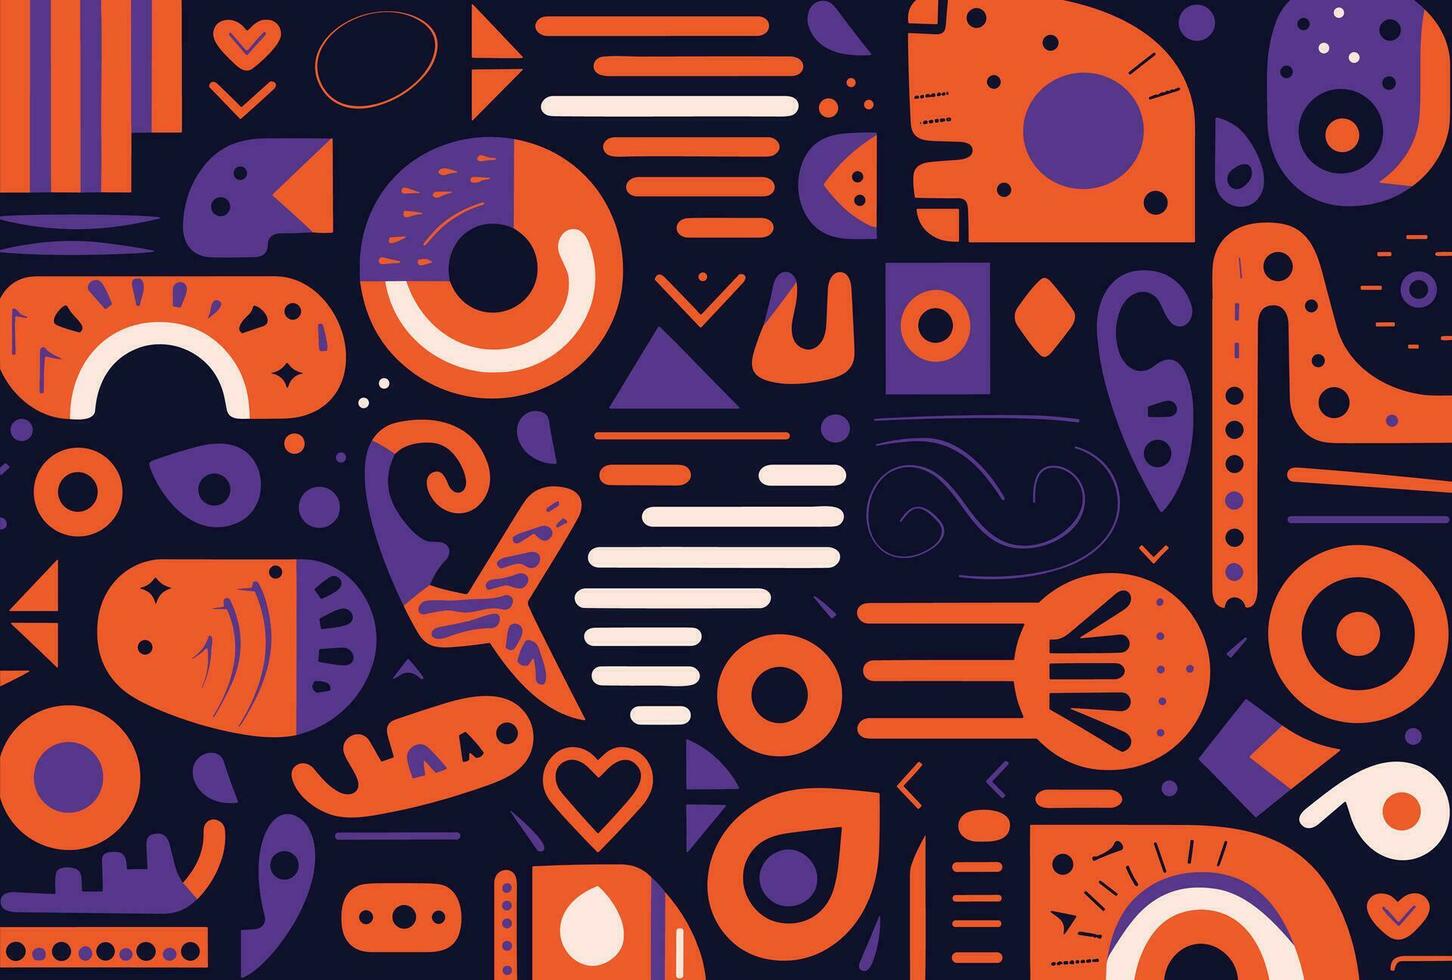 0's retro background with hand drawn shapes and letters, in the style of dark orange and navy, african-inspired textile patterns, bold geometric minimalism, bold, colorful, large-scale vector